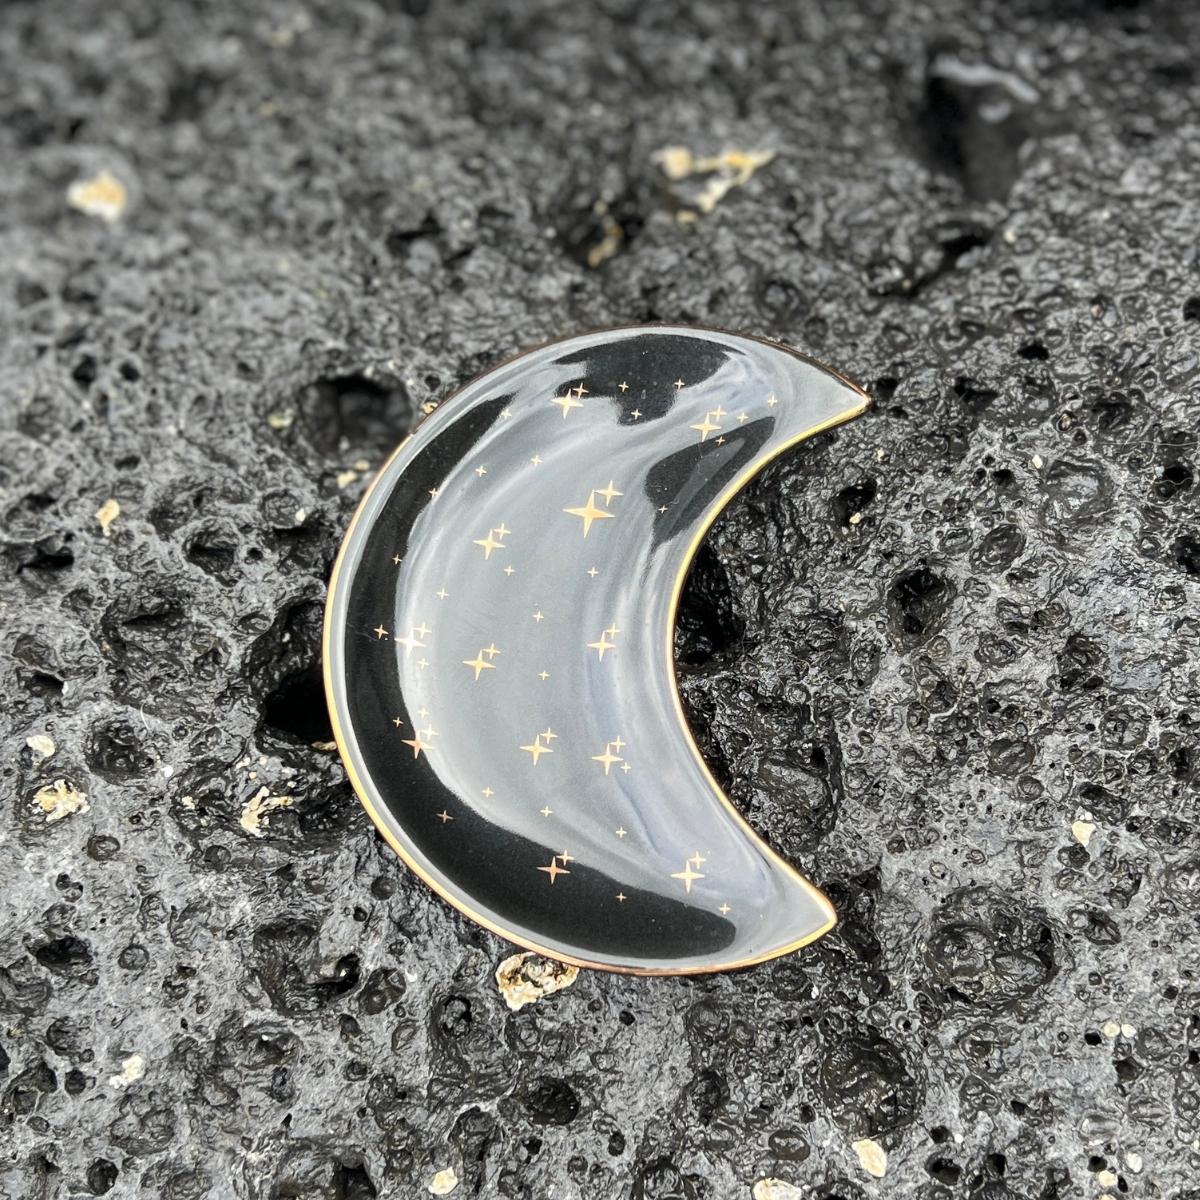 The Celeste Jewelry Dish is a beautiful and ethereal crescent-shaped ceramic dish, perfect for storing and displaying your favorite jewelry pieces. The dish features a stunning cosmic-inspired design, with gold stars and a black background that create a celestial and magical look.